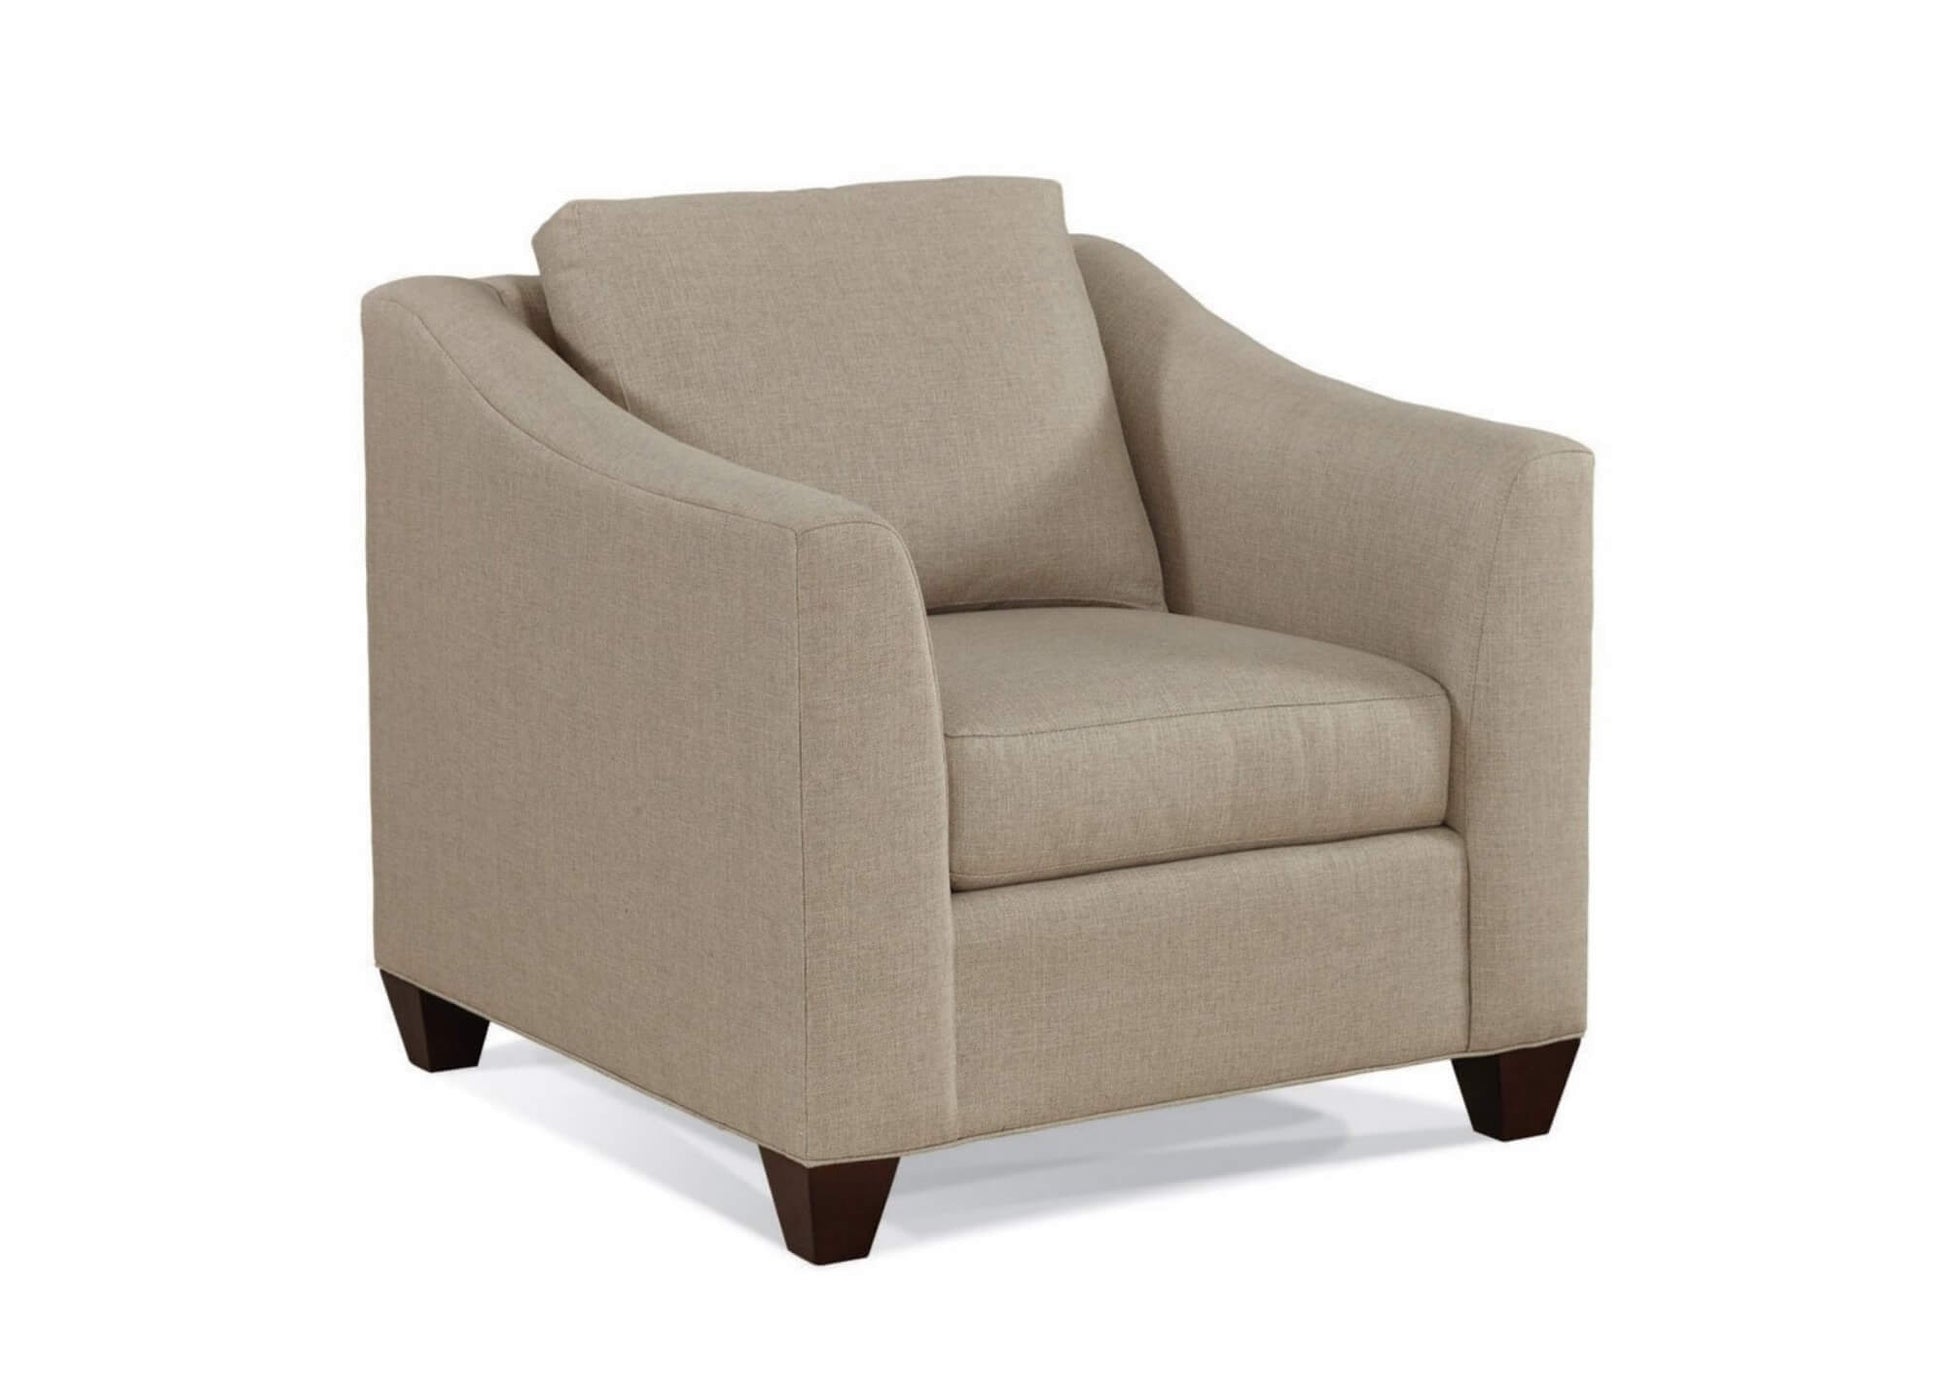 Sherrill Furniture 45 Series chair in a beige fabric with curve arm. 